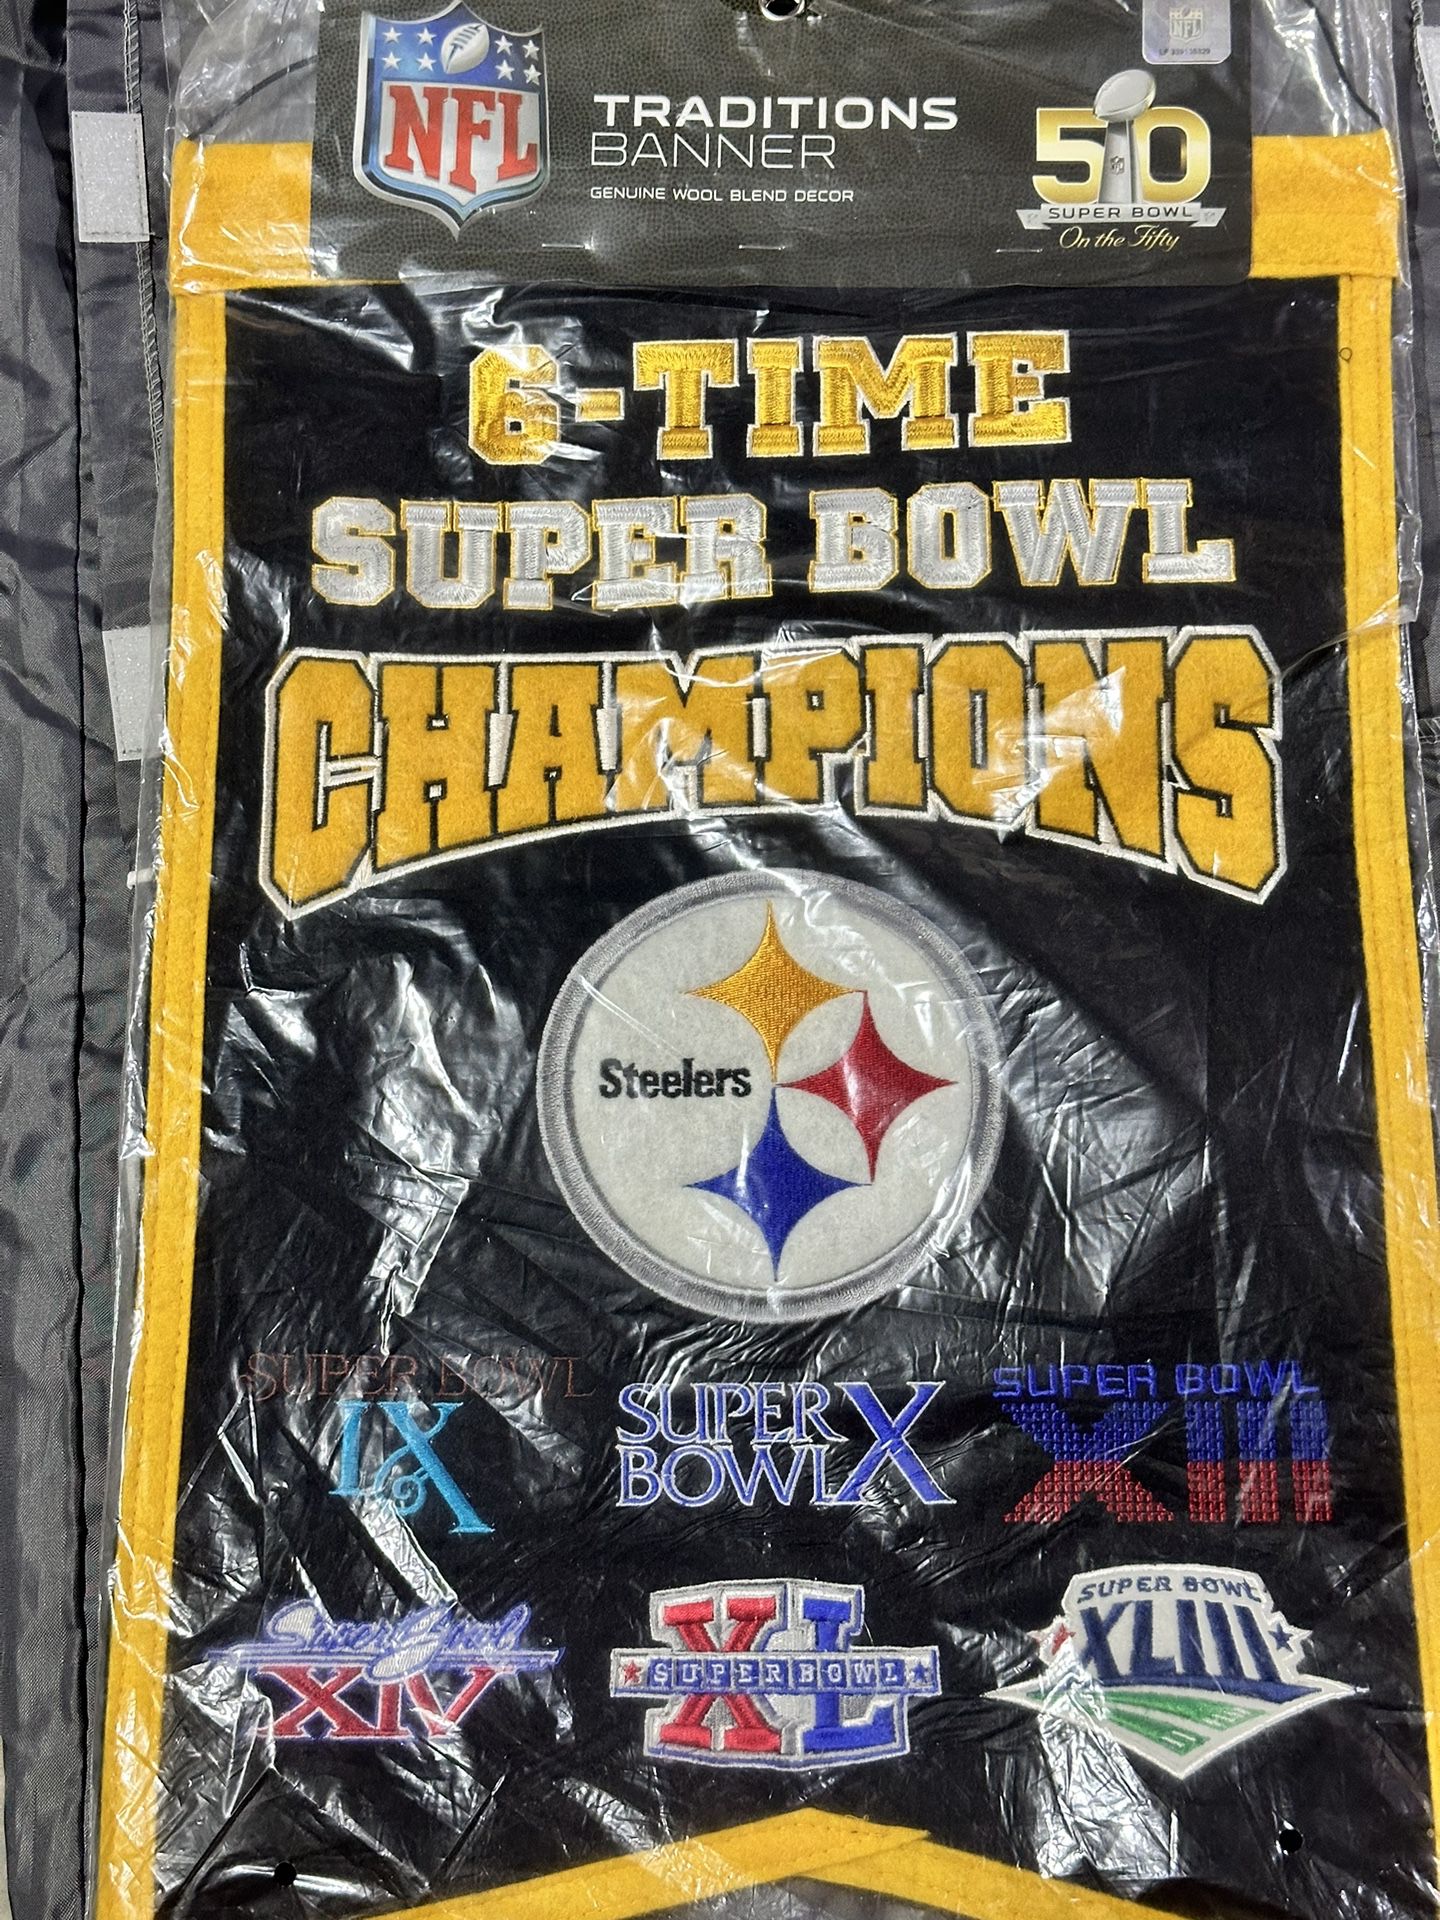 Pittsburgh Steelers Super Bowl Championships Banner 